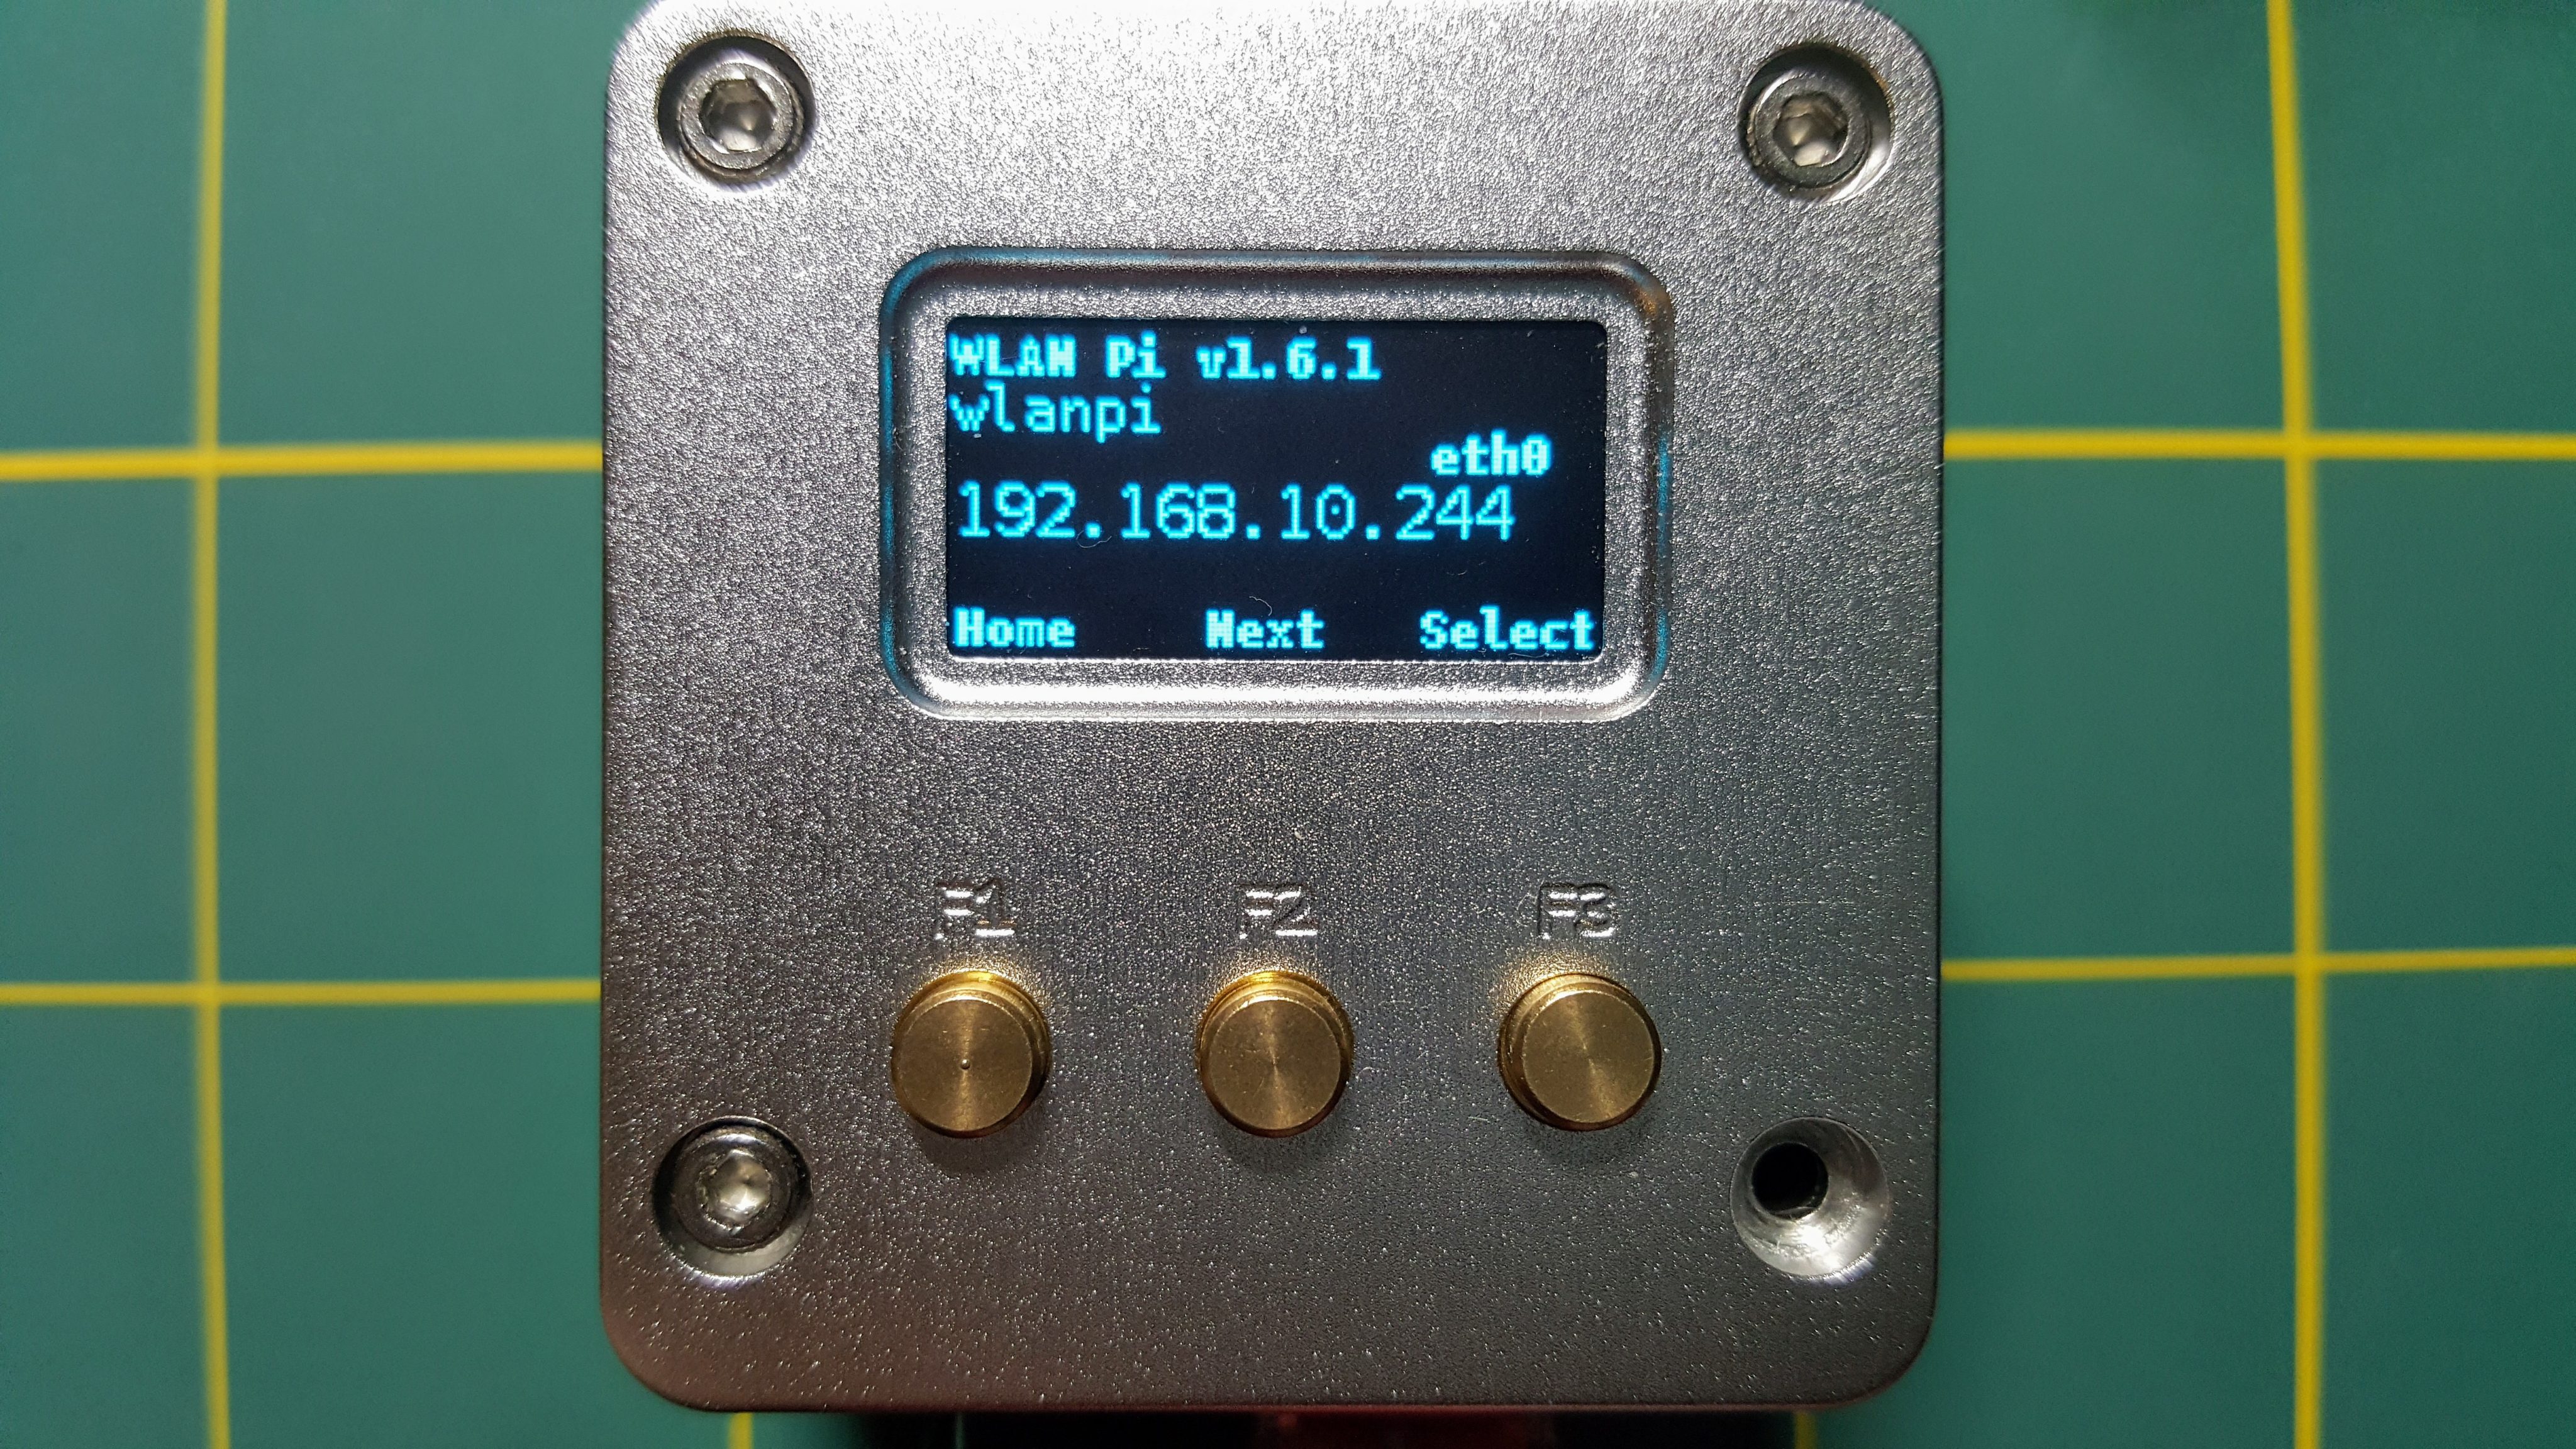 WLANPi with test display and button based menu